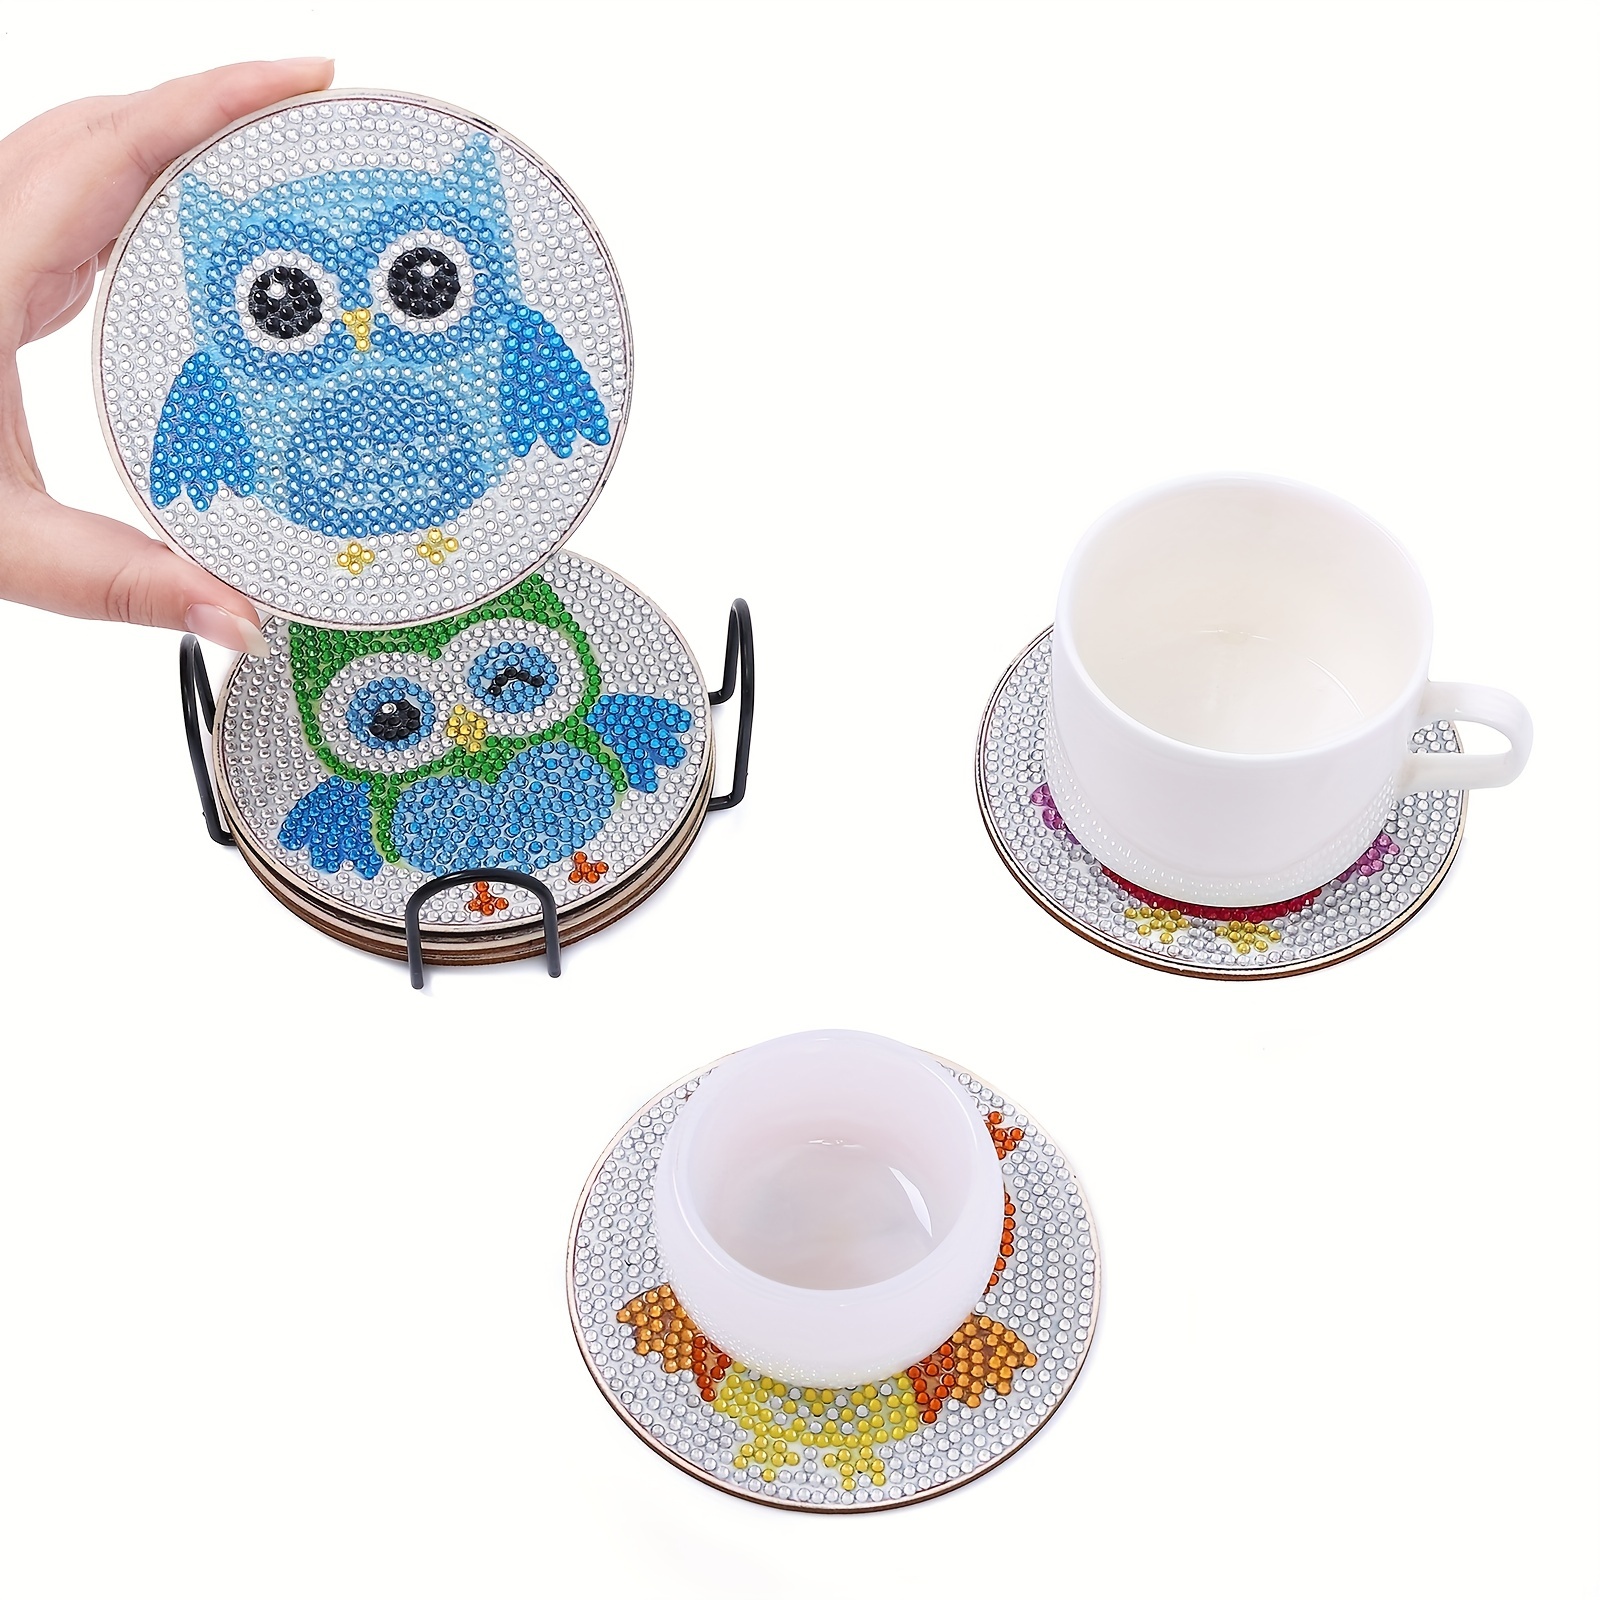 10pcs 10x10cm/3.94x3.94in Owl Shaped Diamond Painting Coasters Set, DIY Owl  Diamond Painting Coasters, With Holder, Art Craft Supplies For Beginners